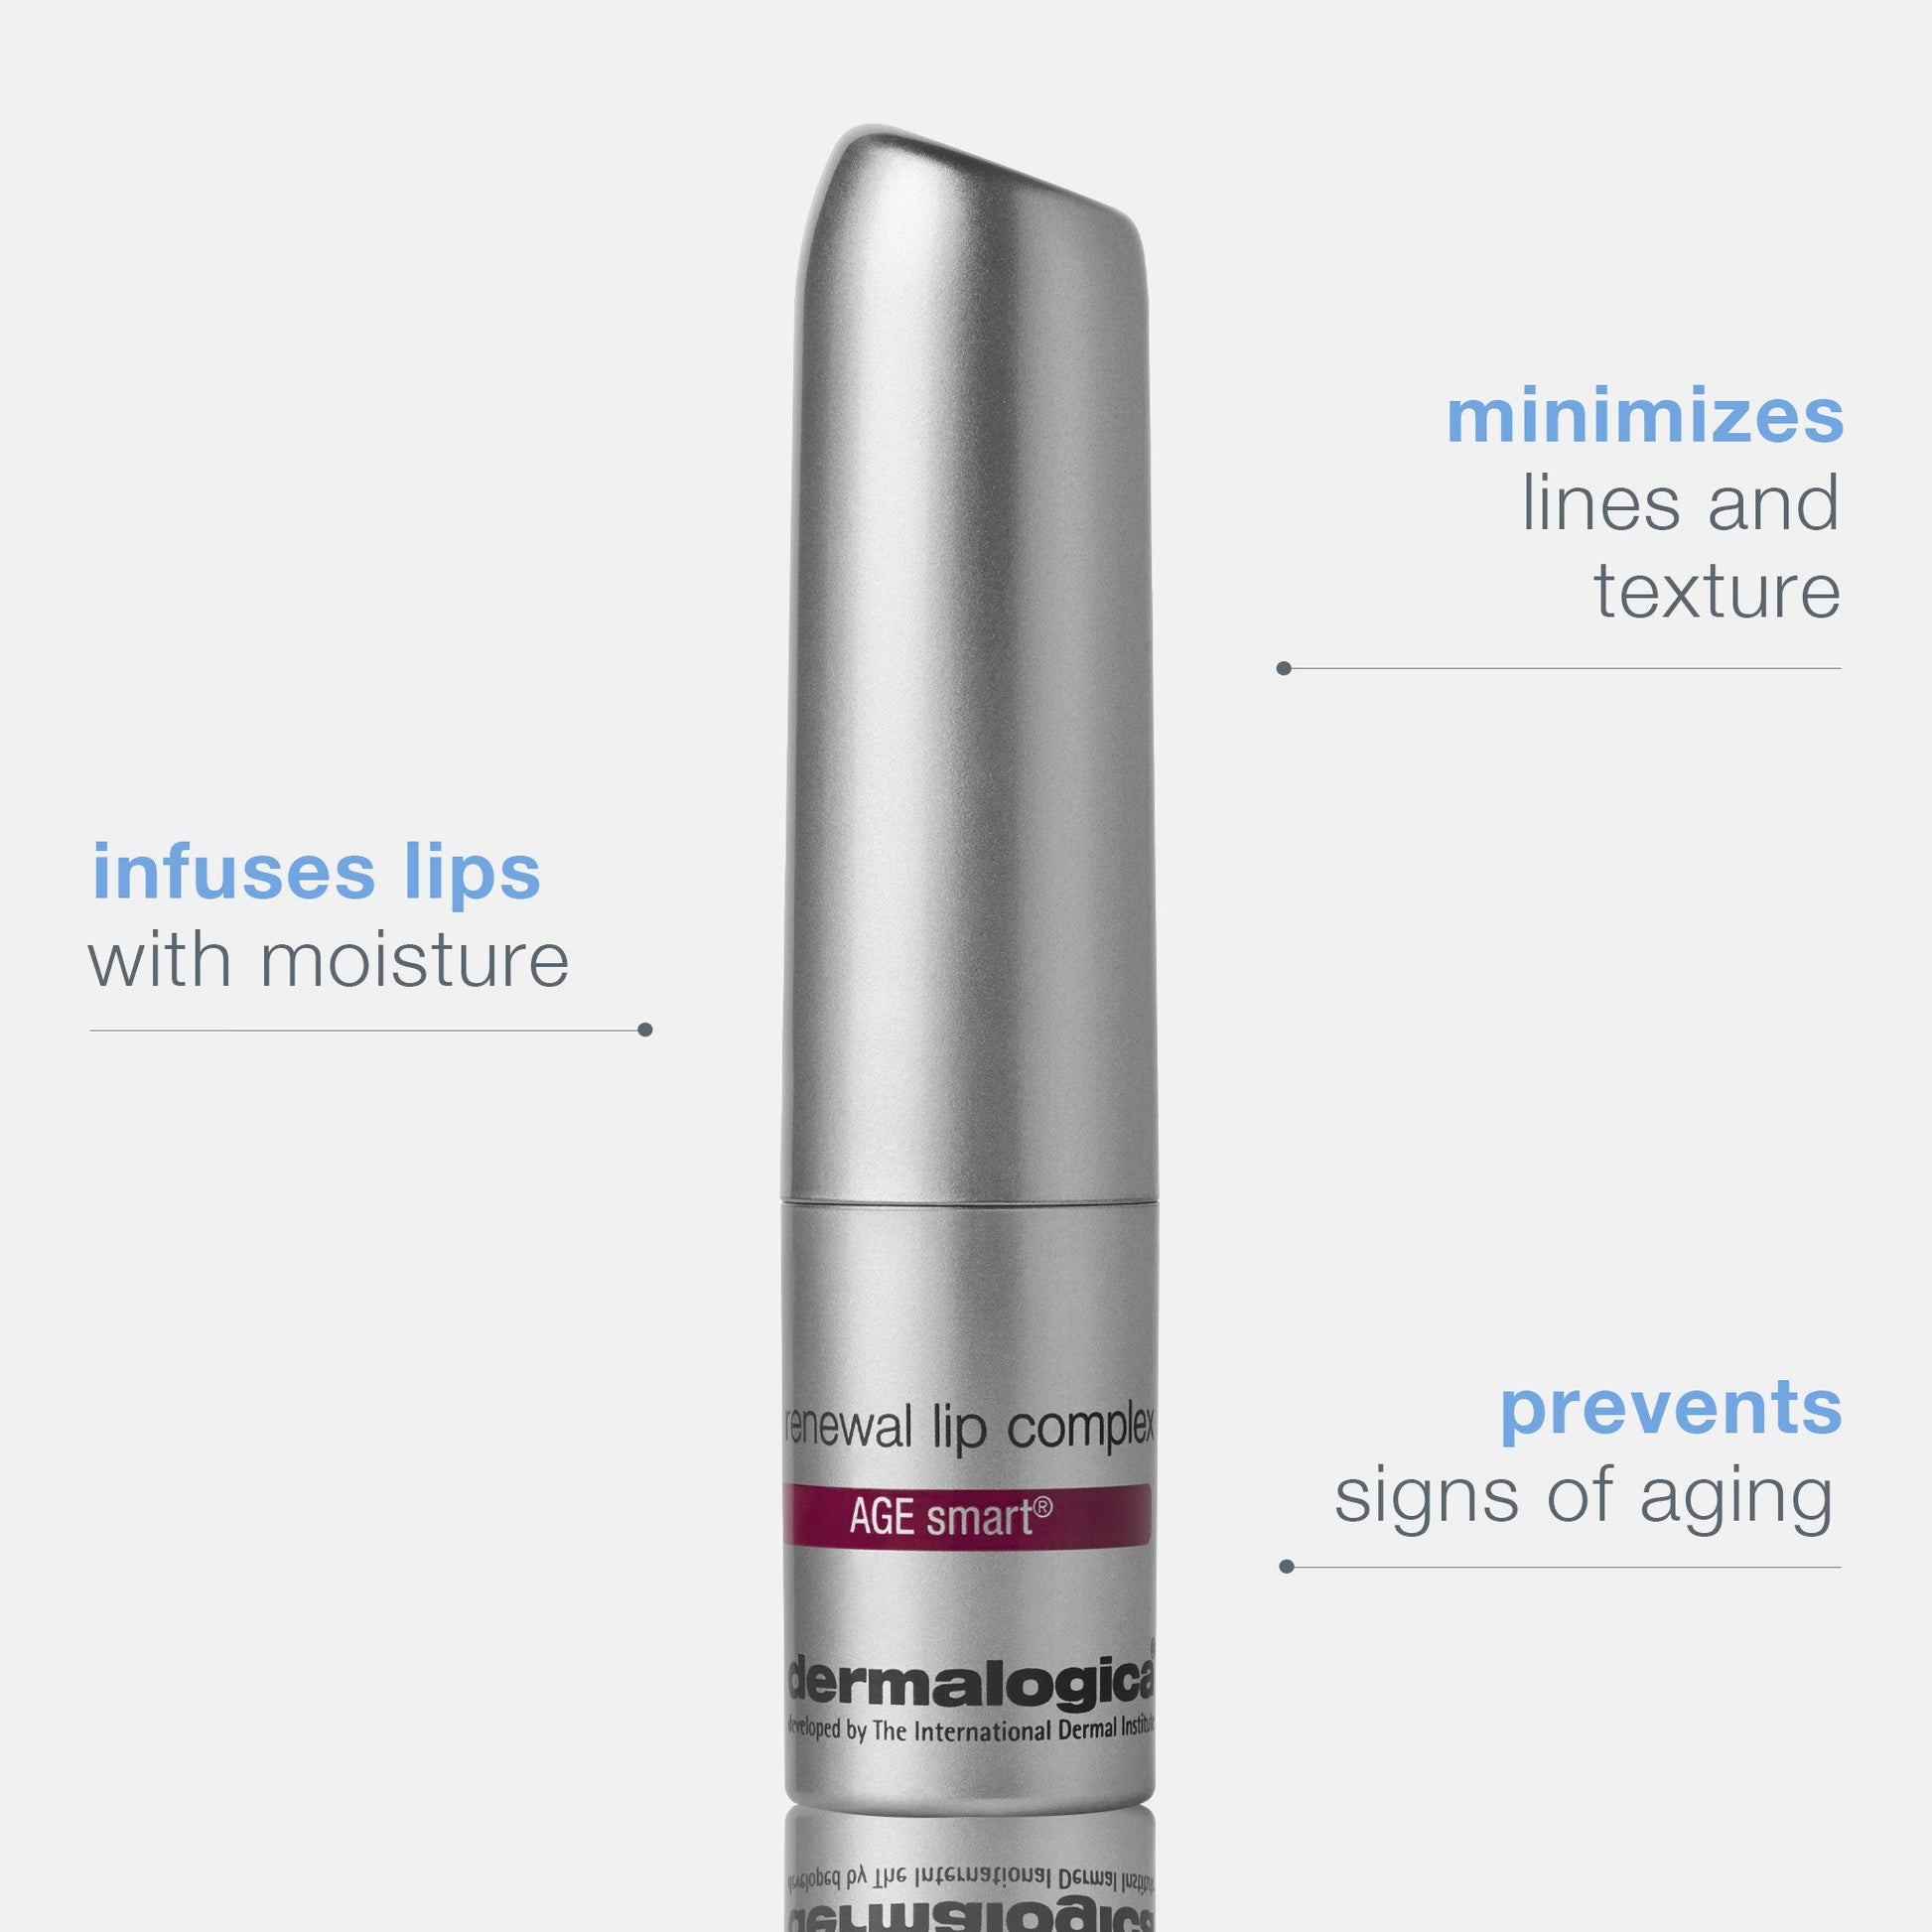 renewal lip complex main with benefits